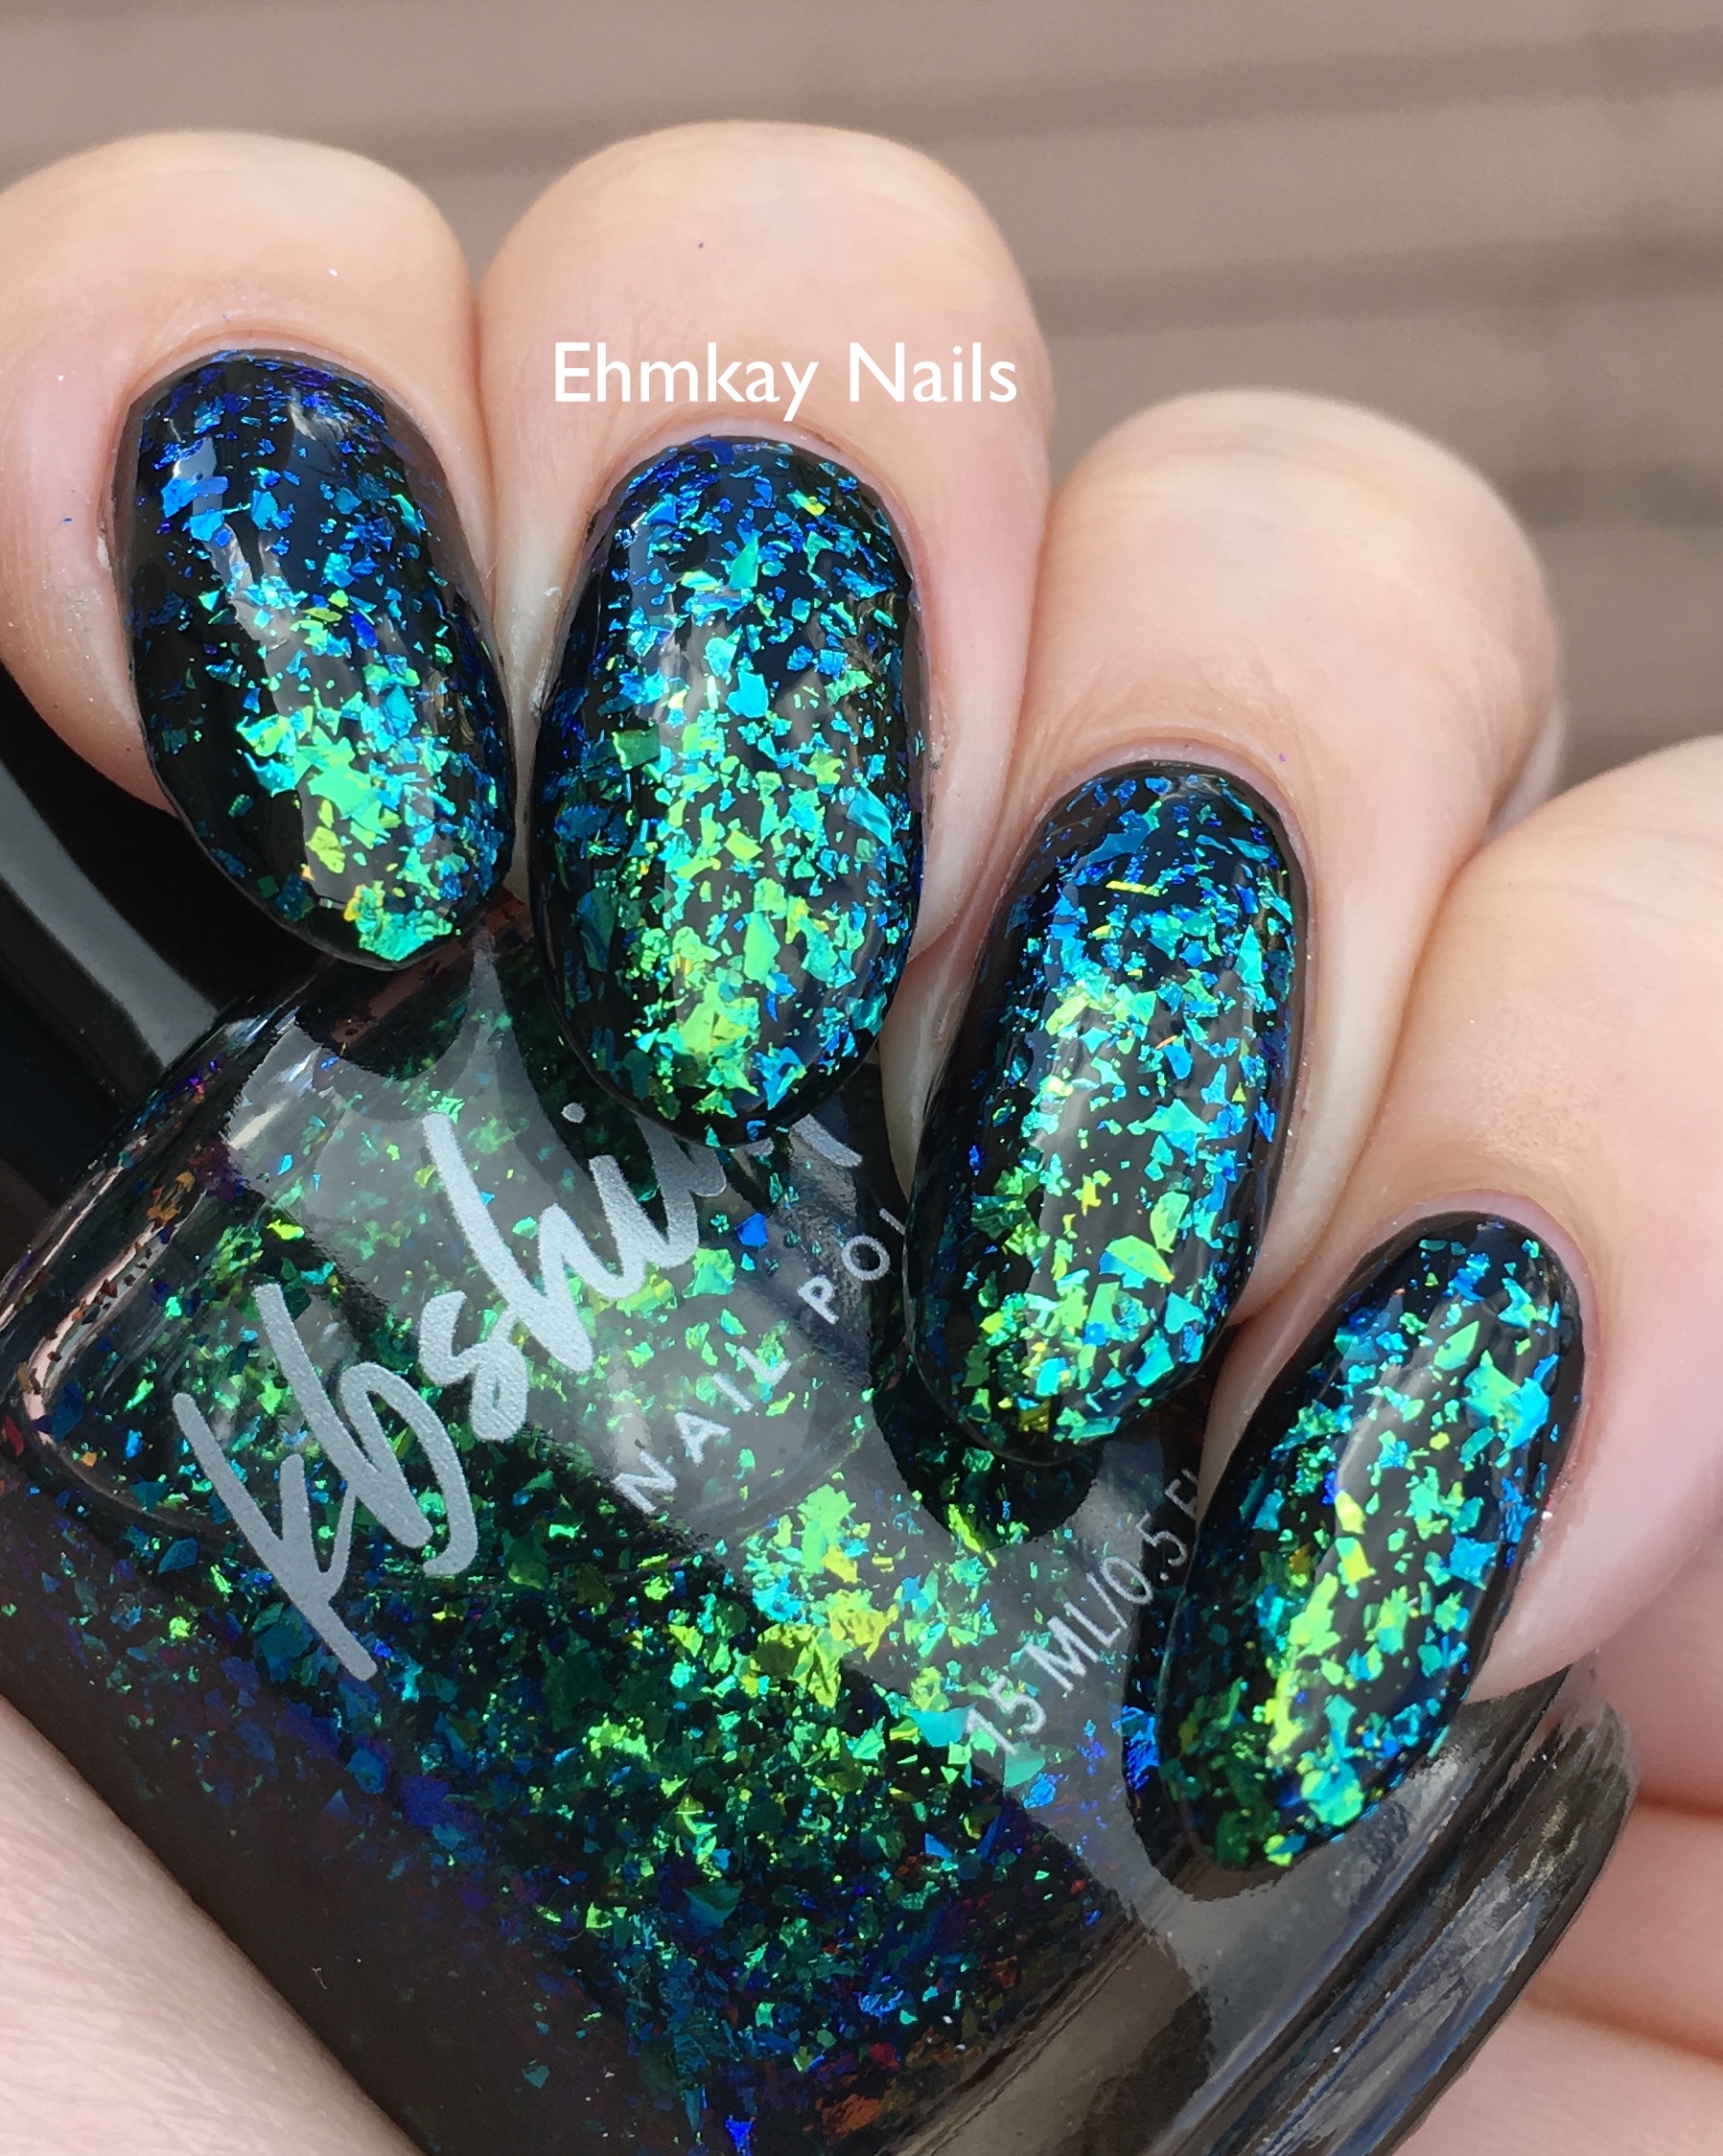 Flake Expectations Multichrome Flake Nail Polish Top Coat by KBShimmer